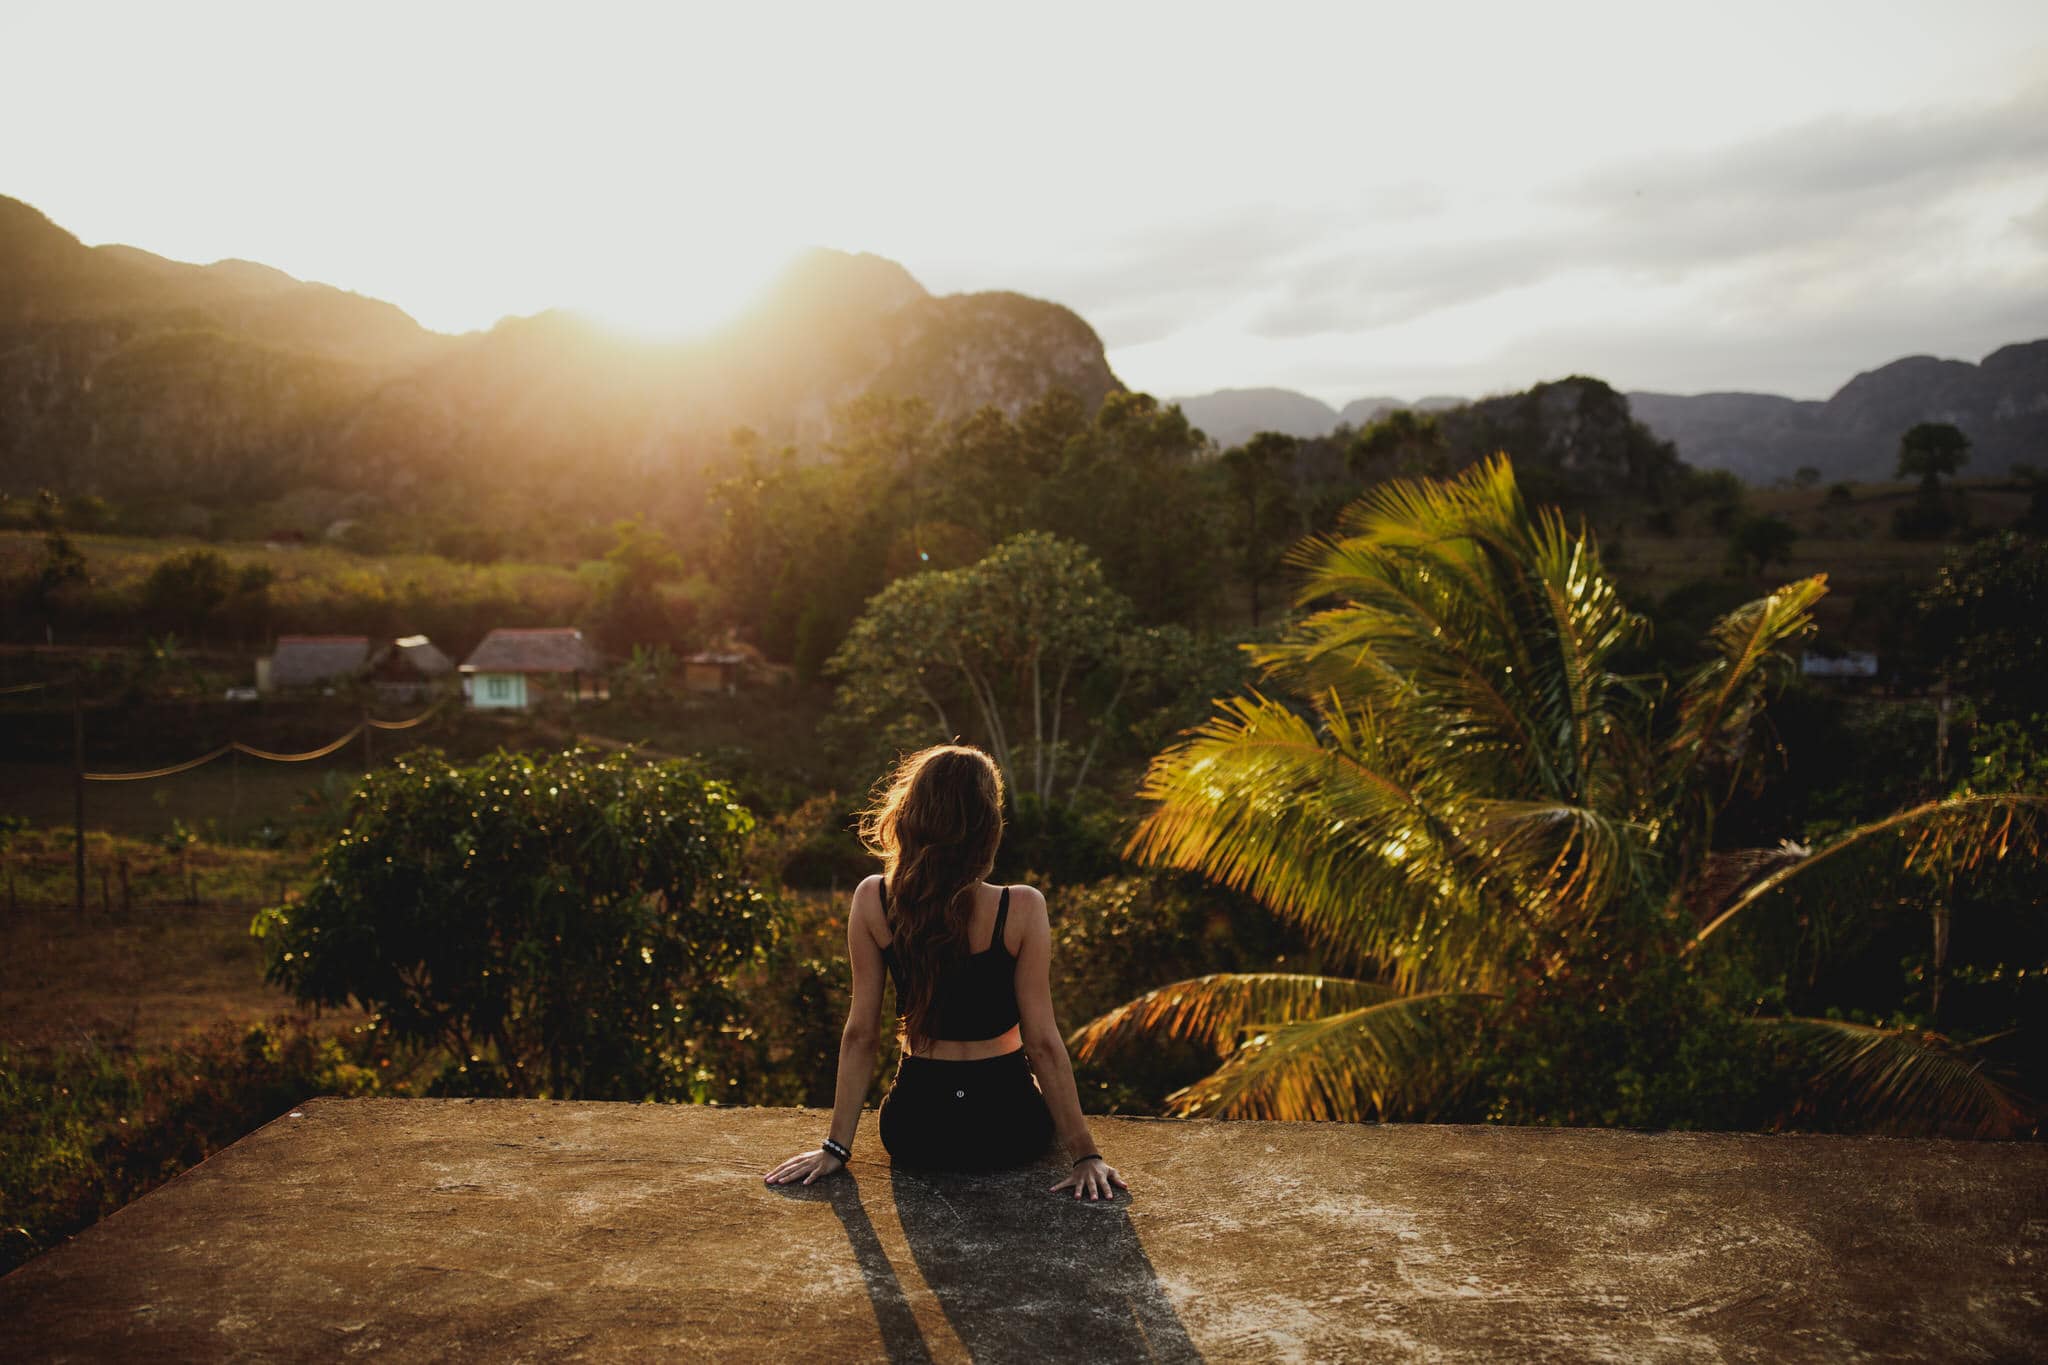 A women enjoying the sunset in the countryside of Vinales, Cuba. Wedding and travel photographer Brent Calis.